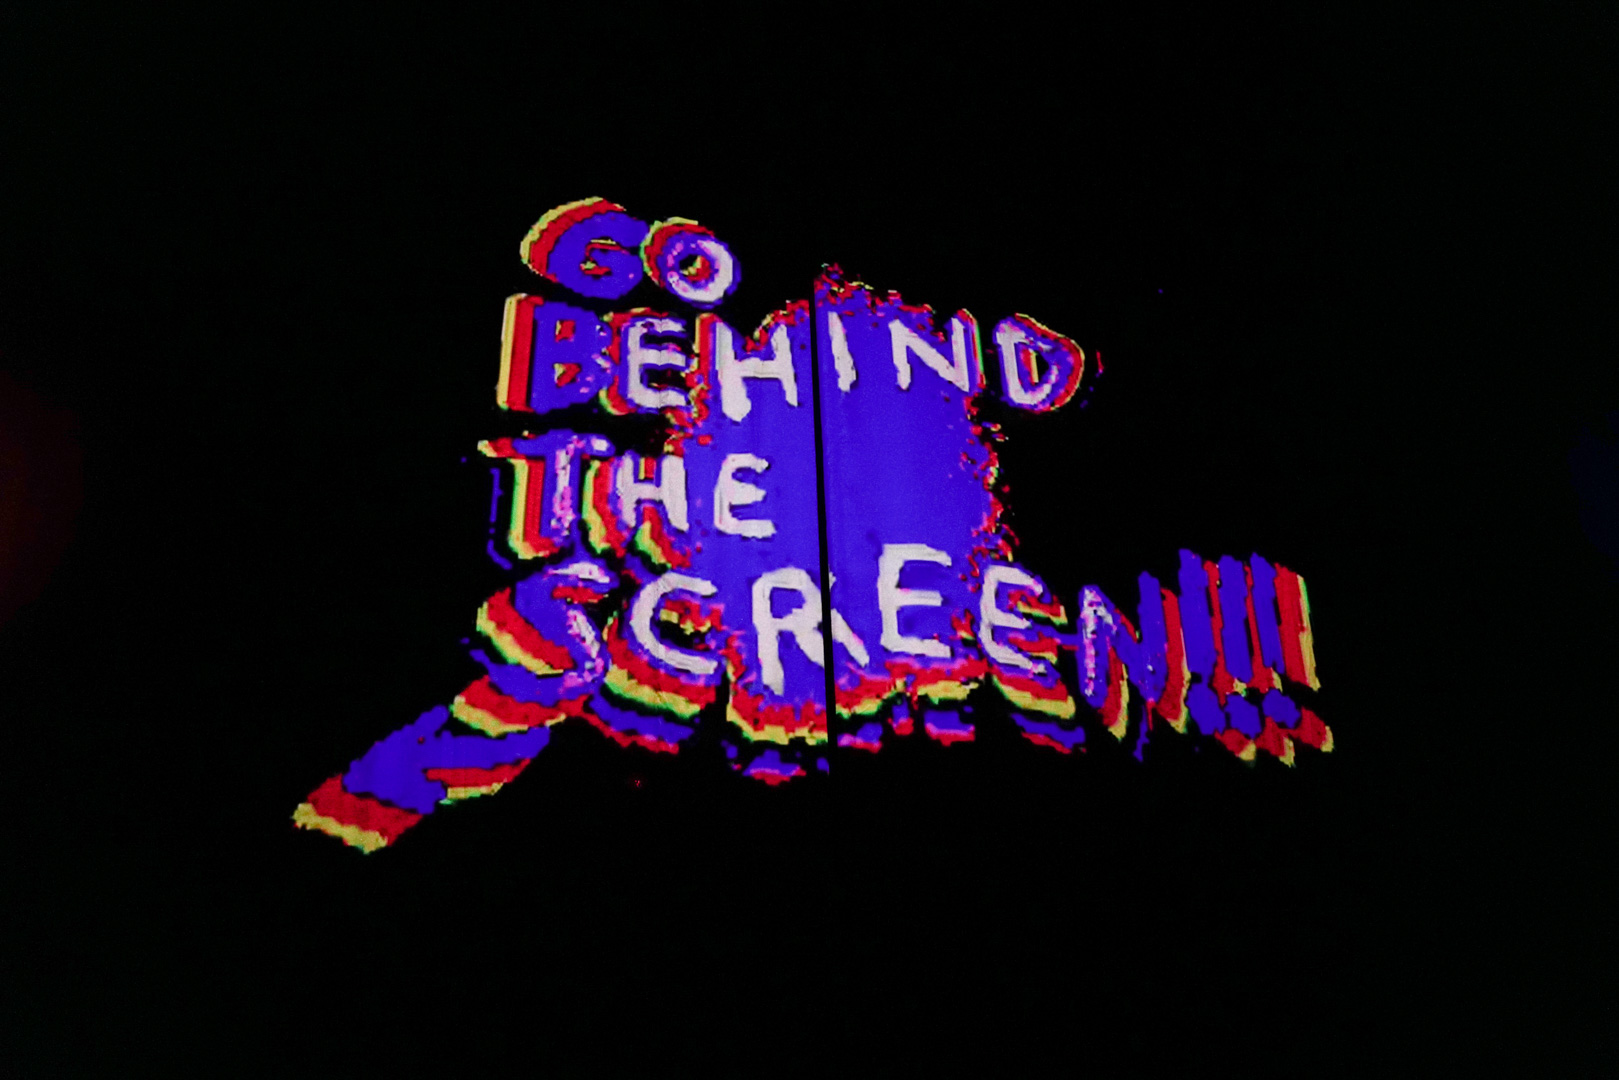 A movie screen with "Go Behind the Screen!" projected